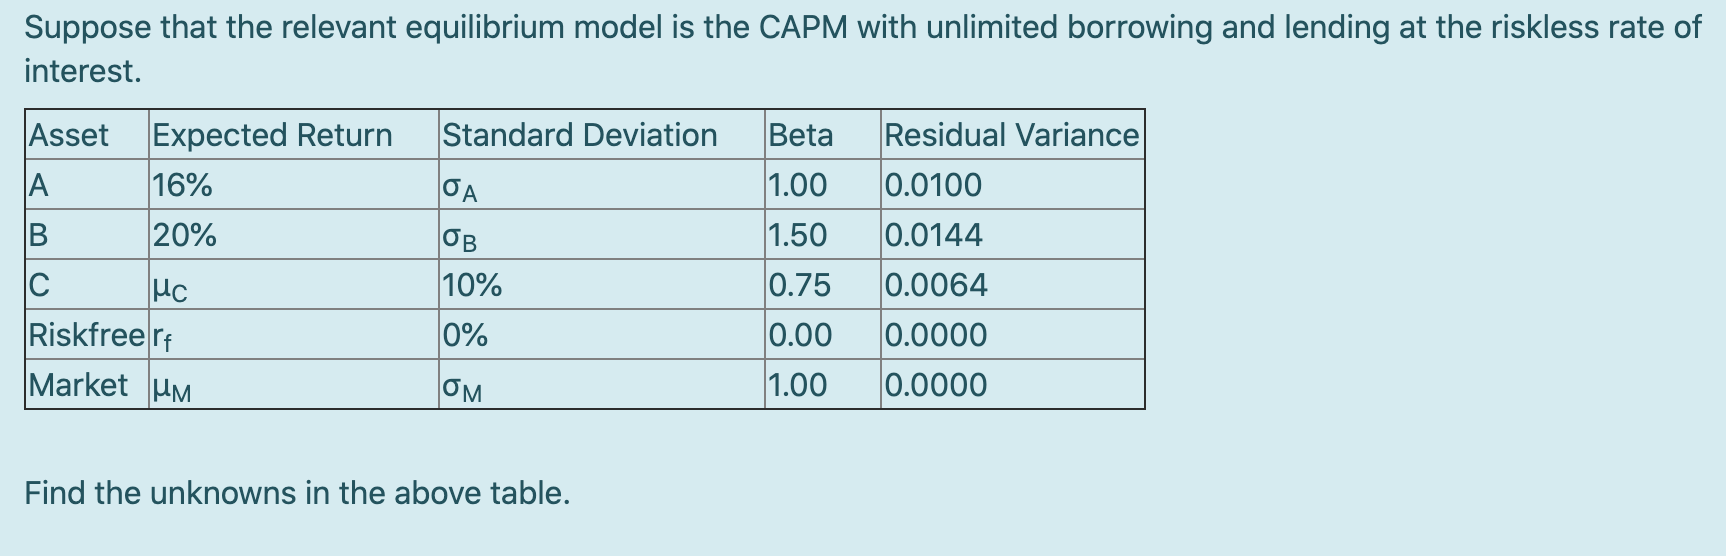 Suppose that the relevant equilibrium model is the CAPM with unlimited borrowing and lending at the riskless rate of
interest.
Expected Return
16%
Standard Deviation
Residual Variance
0.0100
Asset
Beta
A
1.00
20%
1.50
0.0144
OB
10%
0.75
0.0064
Riskfree rf
Market UM
0%
0.00
|0.0000
OM
1.00
0.0000
Find the unknowns in the above table.
